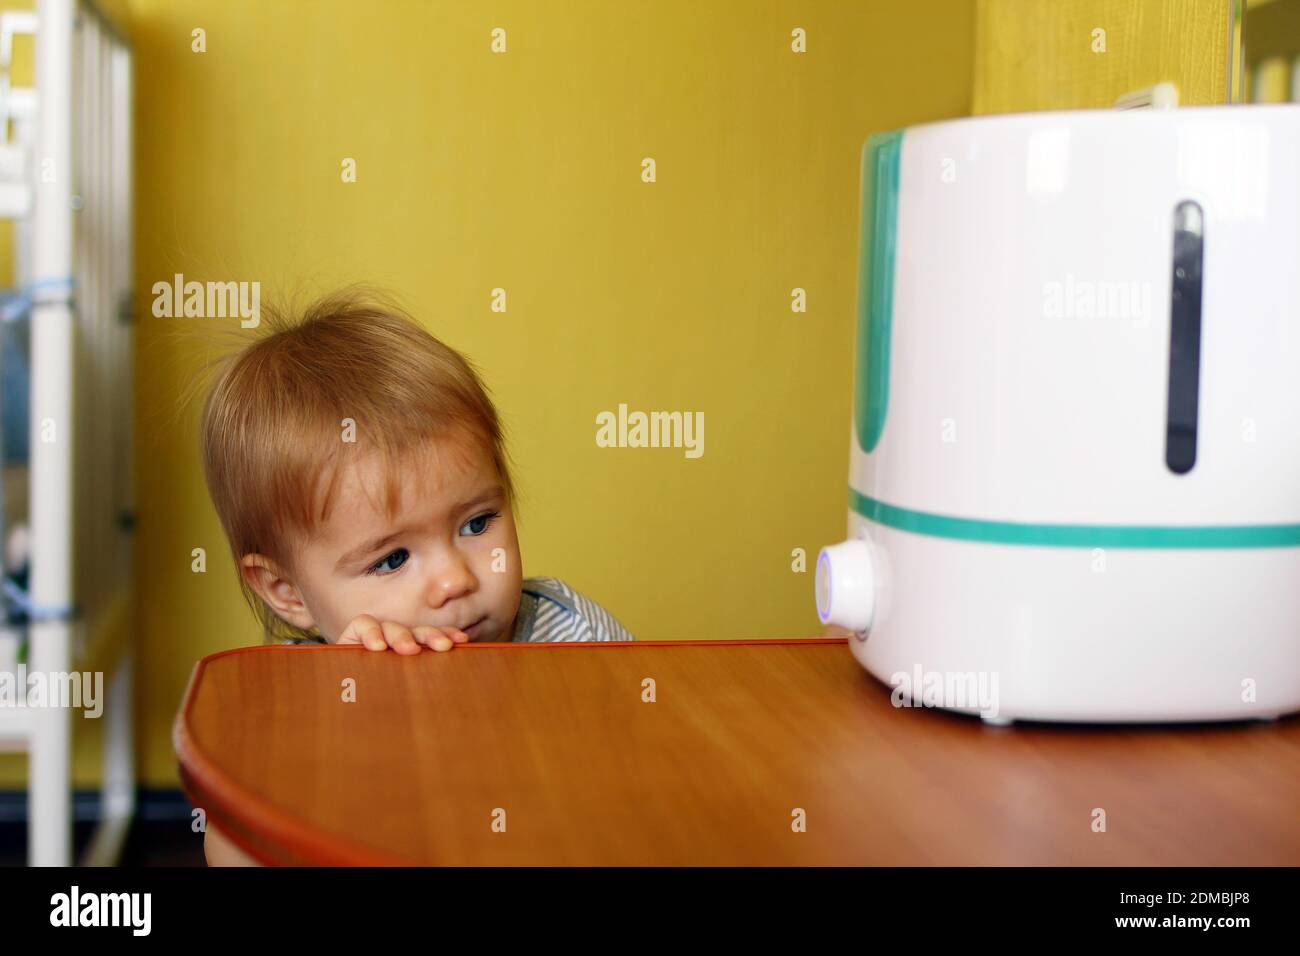 Humidifier And Children High Resolution Stock Photography and Images - Alamy